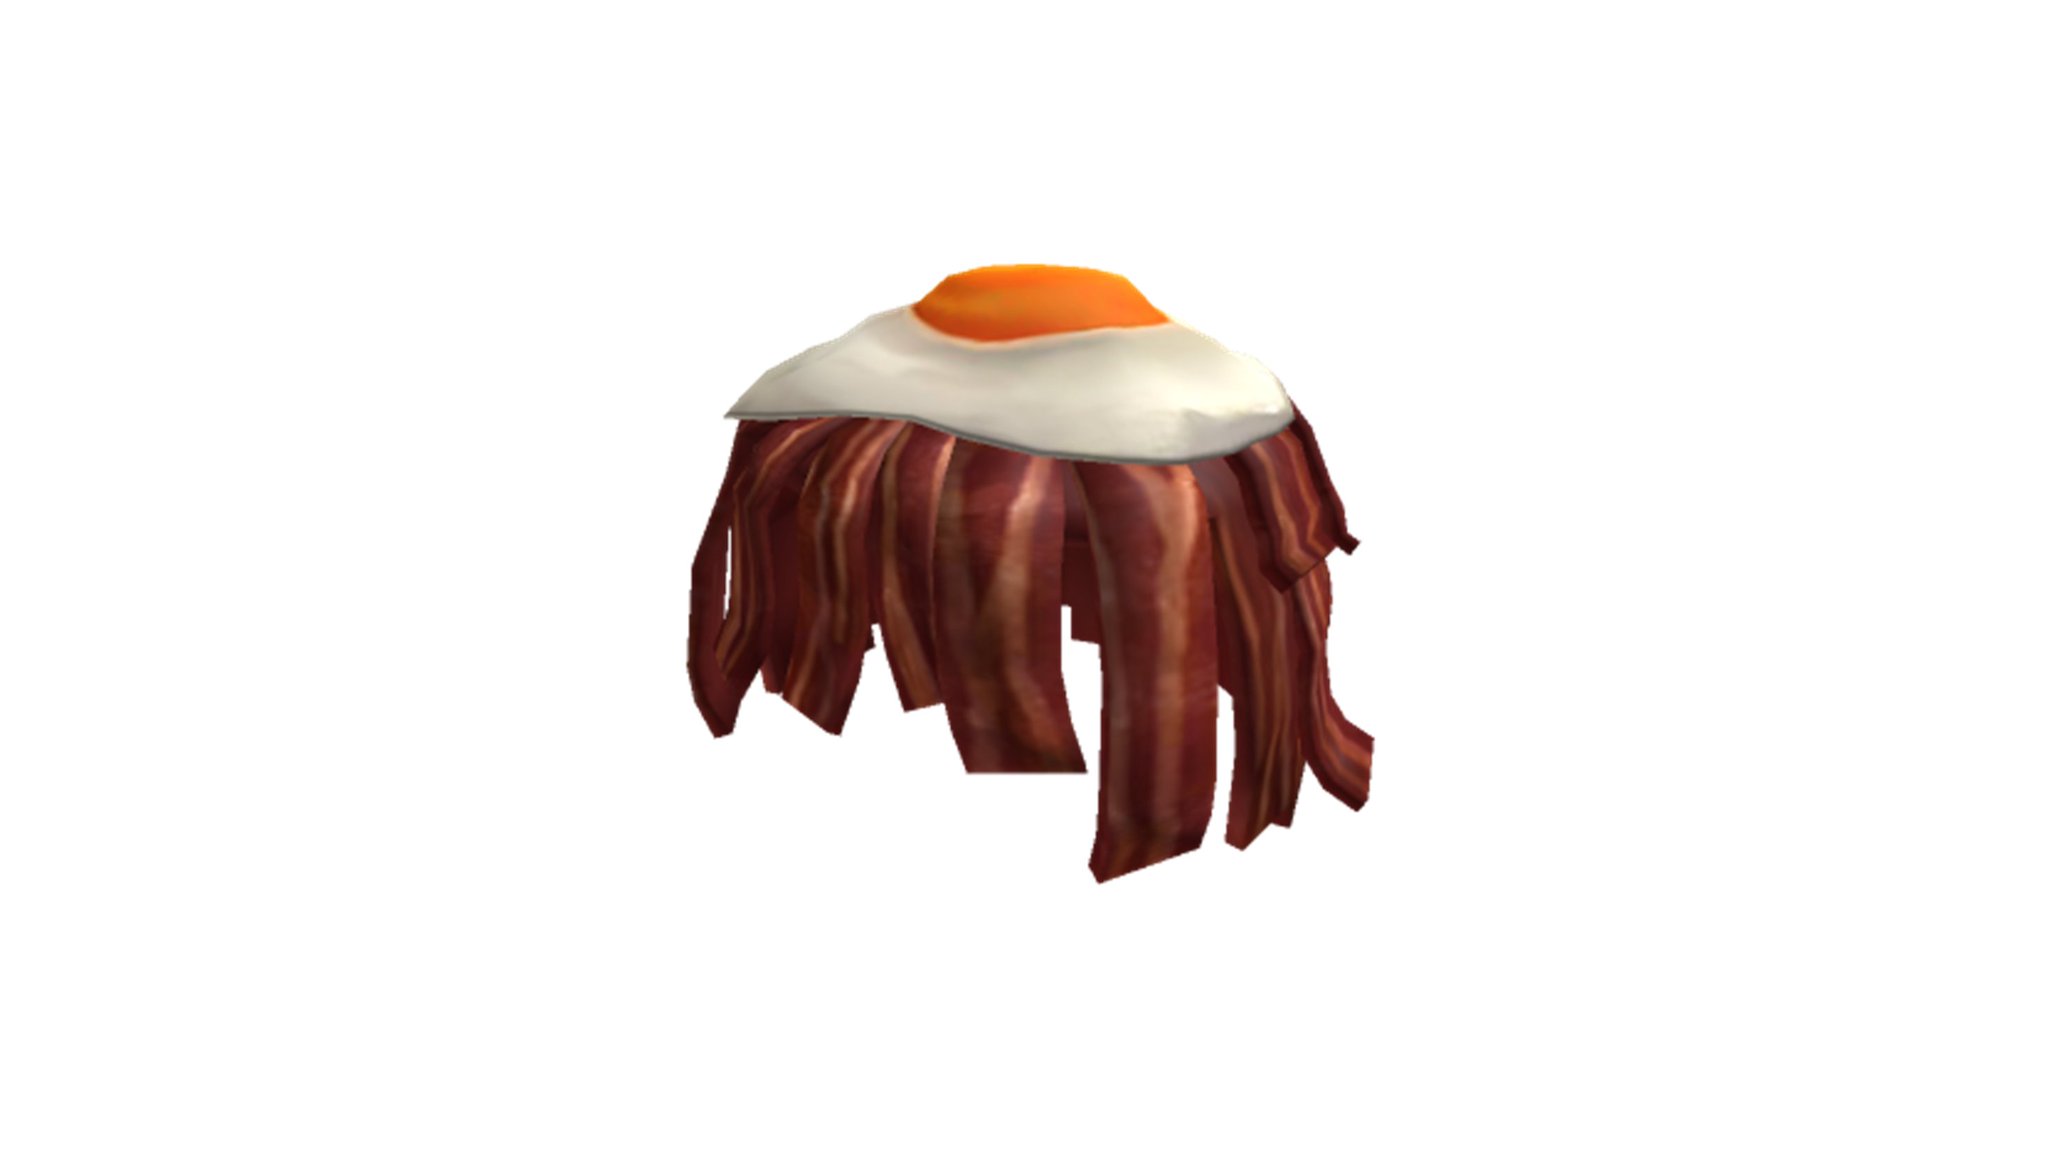 Bloxy News On Twitter The Next Free Limited Time Bonus Virtual Item You Can Receive When You Purchase A Roblox Gift Card Directly From Https T Co Sedyub1m4m Will Be This Bacon And Egg Hair - roblox pal hair